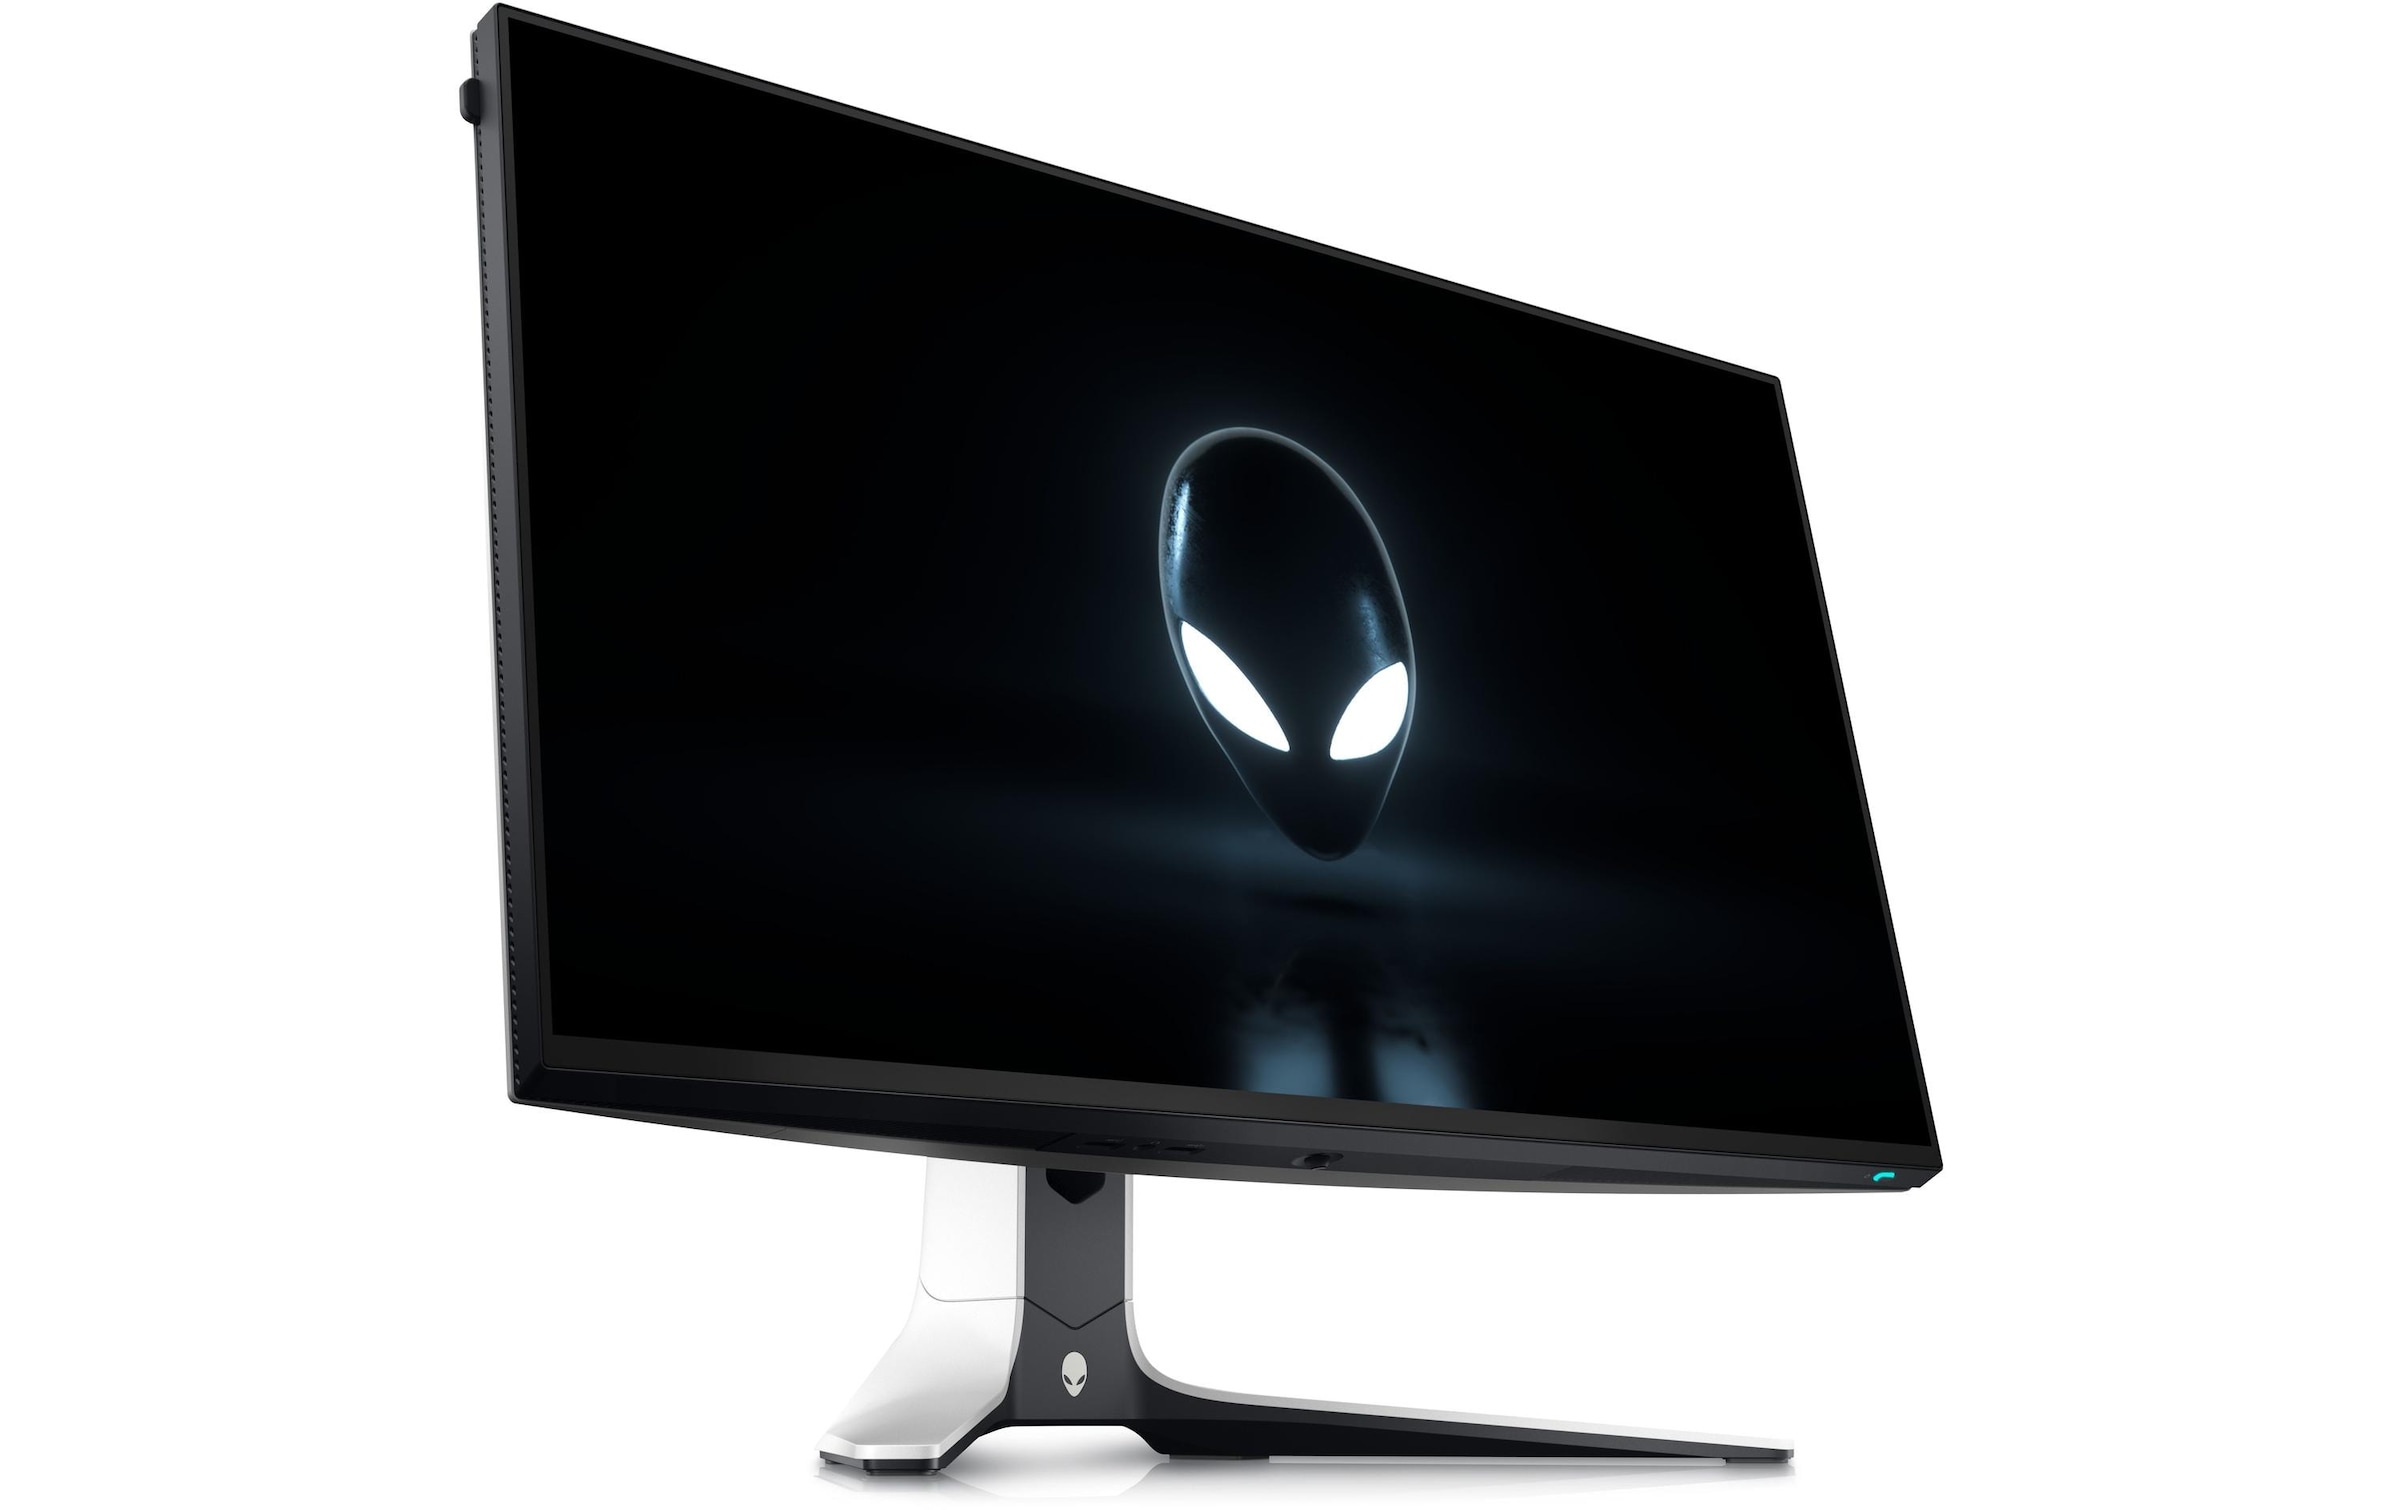 Dell Gaming-Monitor »Alienware 27 AW2723DF«, 68,31 cm/27 Zoll, 2560 x 1440 px, WQHD, 280 Hz